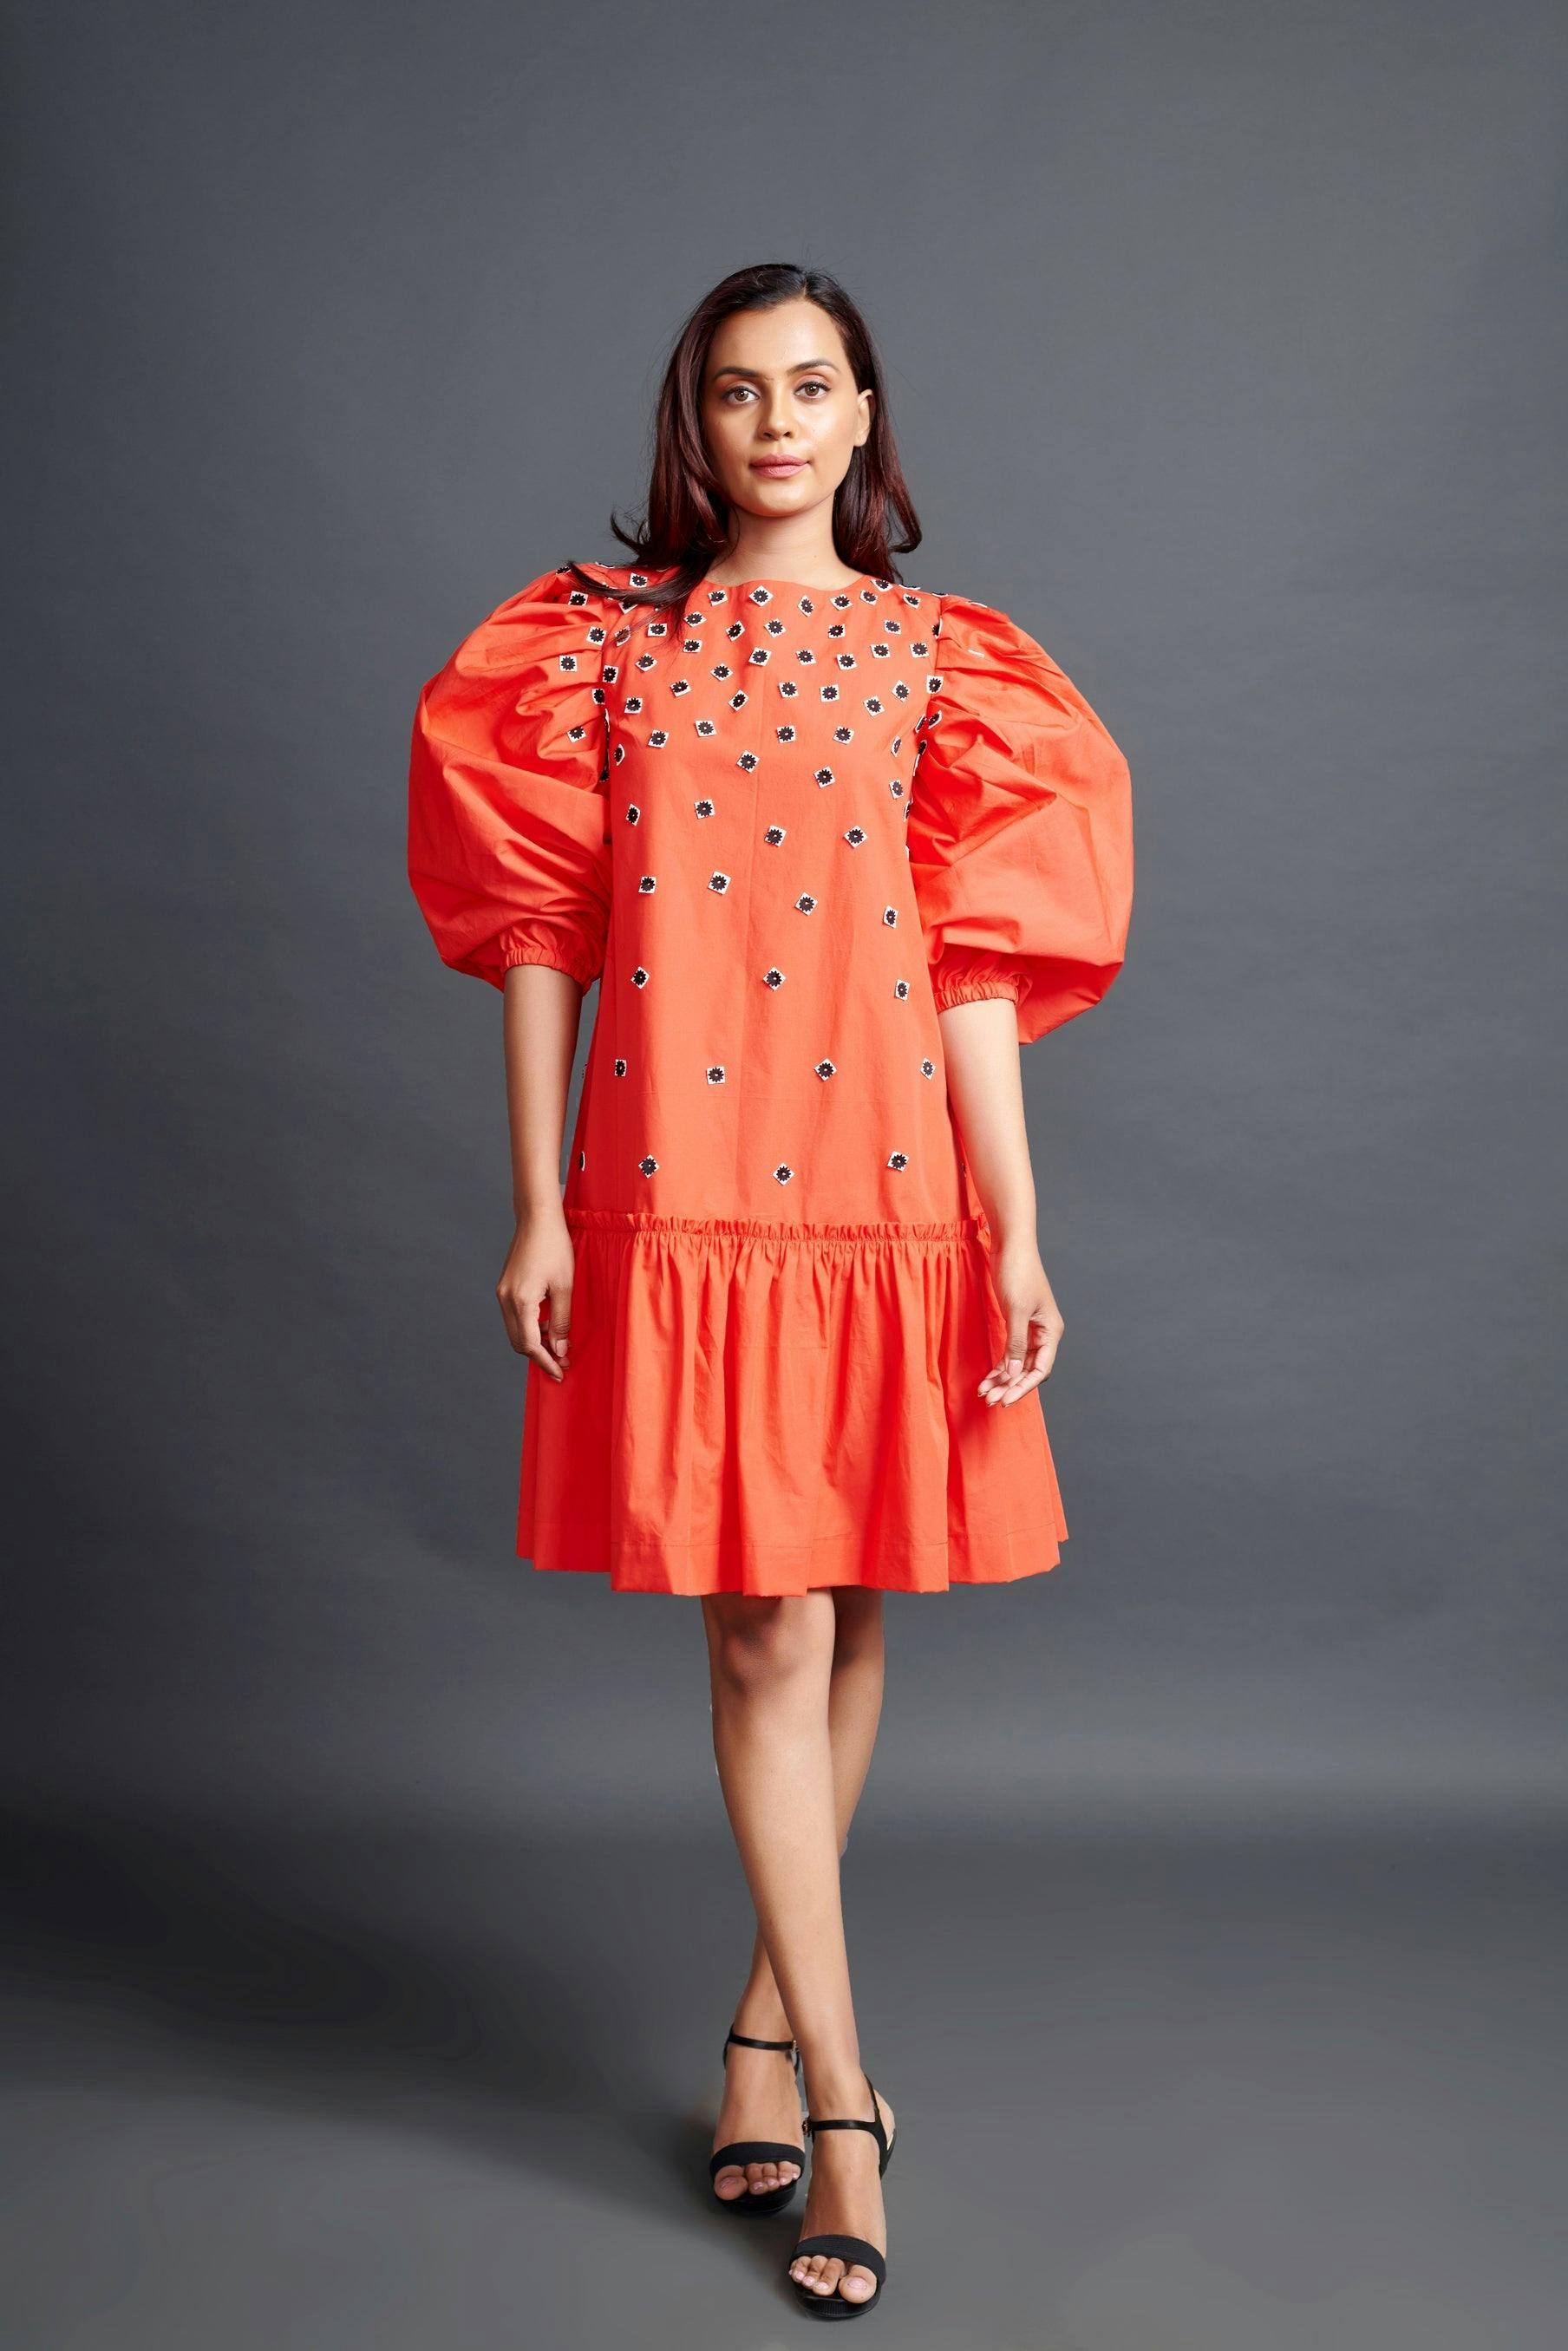 WF-1102-ORANGE ::: Orange Short Backless Dress With Embroidery, a product by Deepika Arora